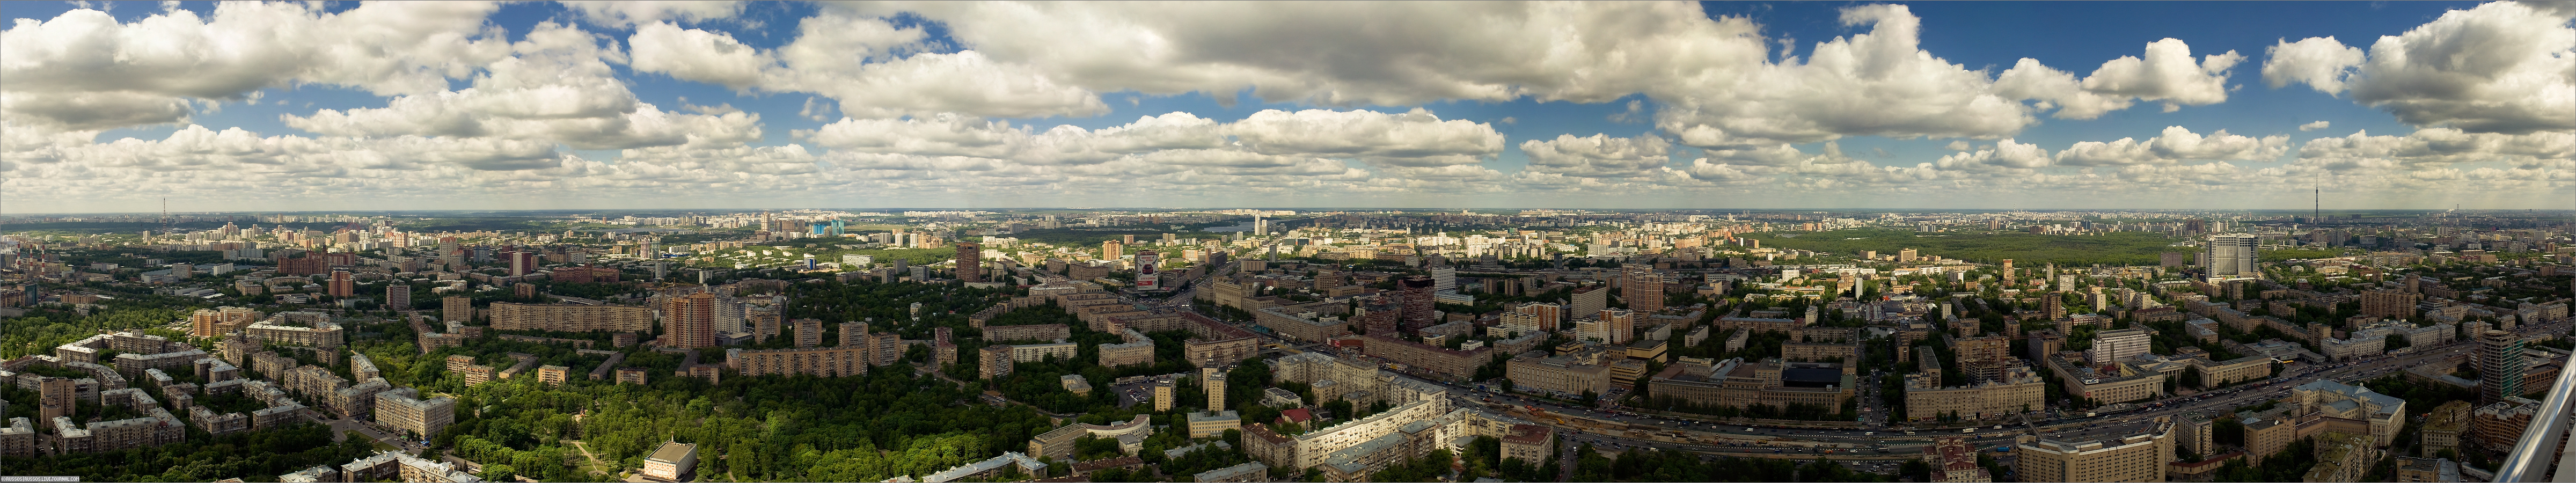 Zy Image Cashadvance6online Panorama Of Moscow